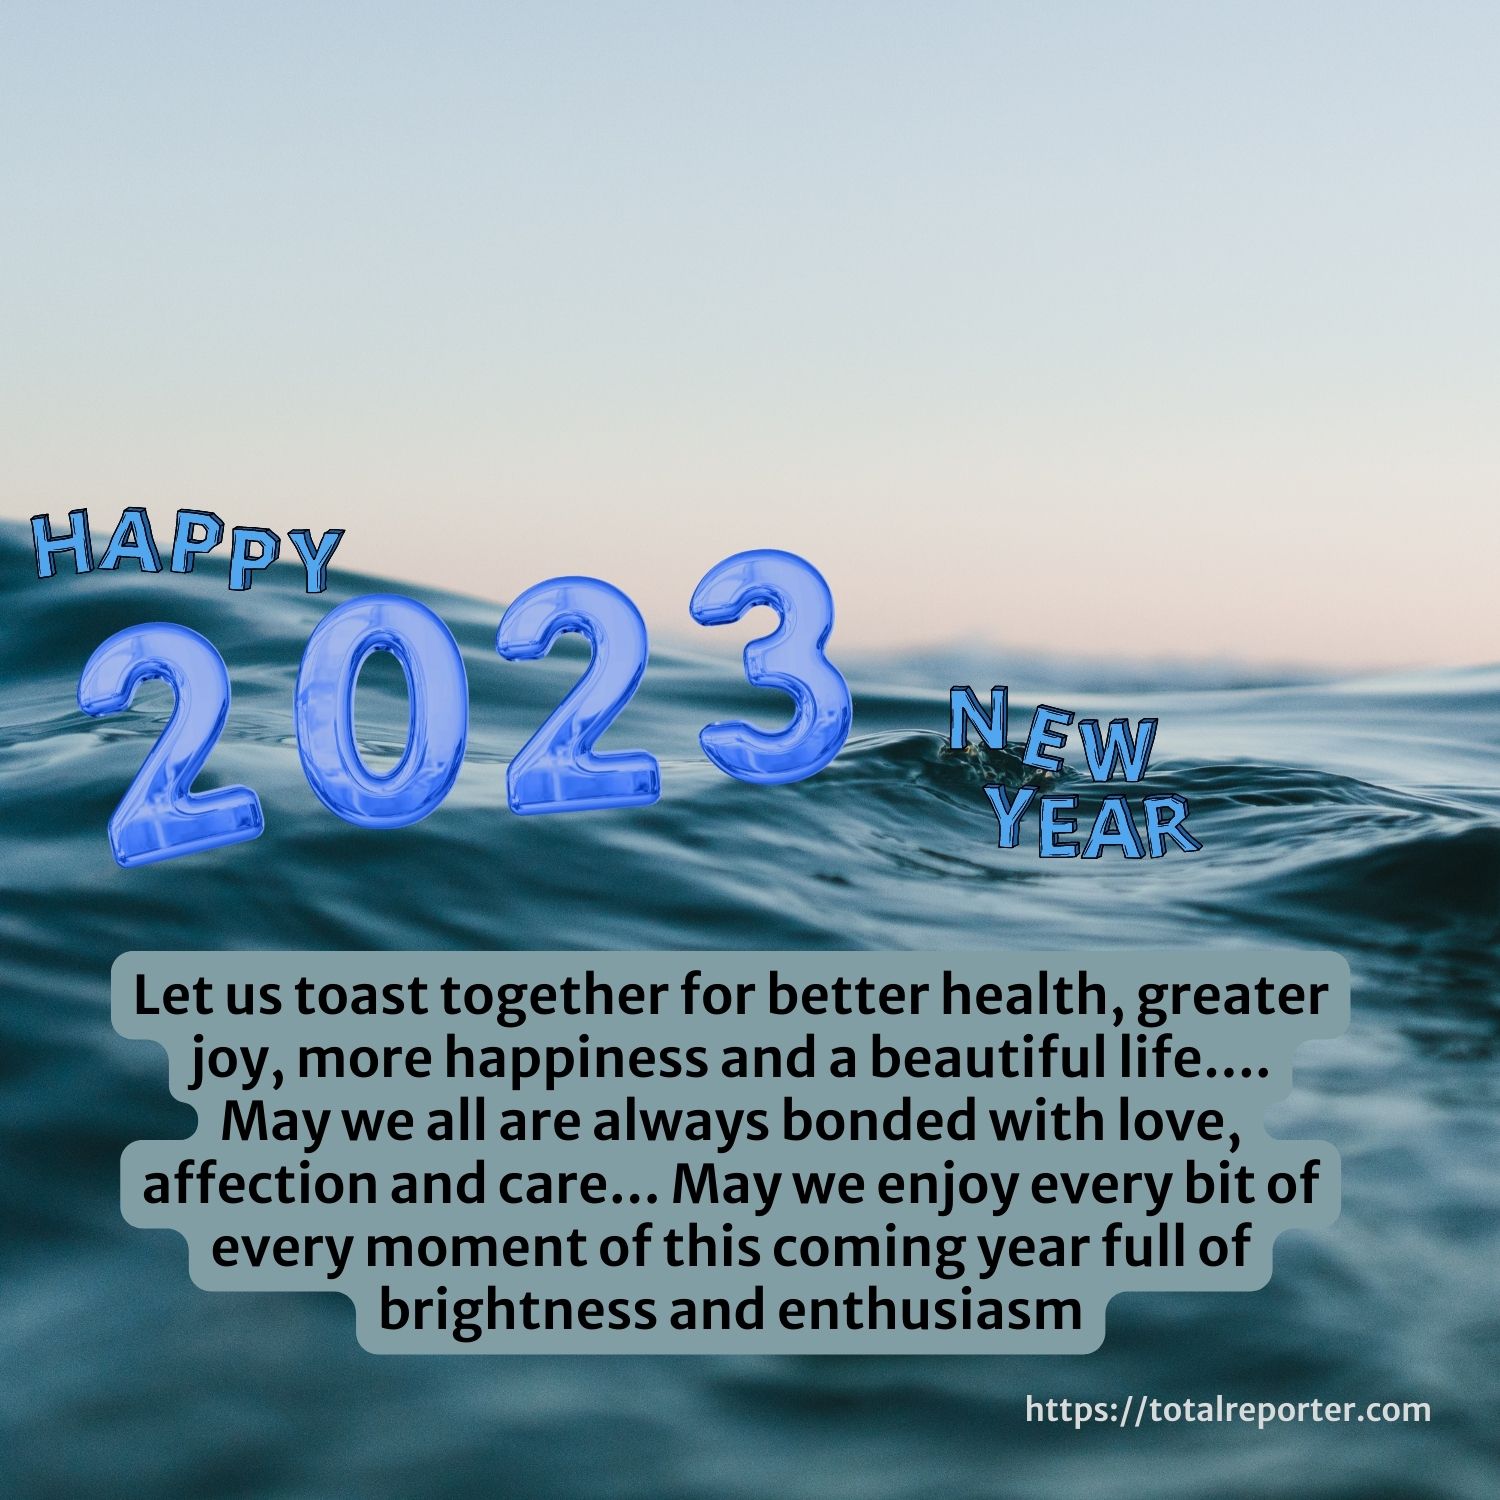 Happy new year wishes images hd 2023